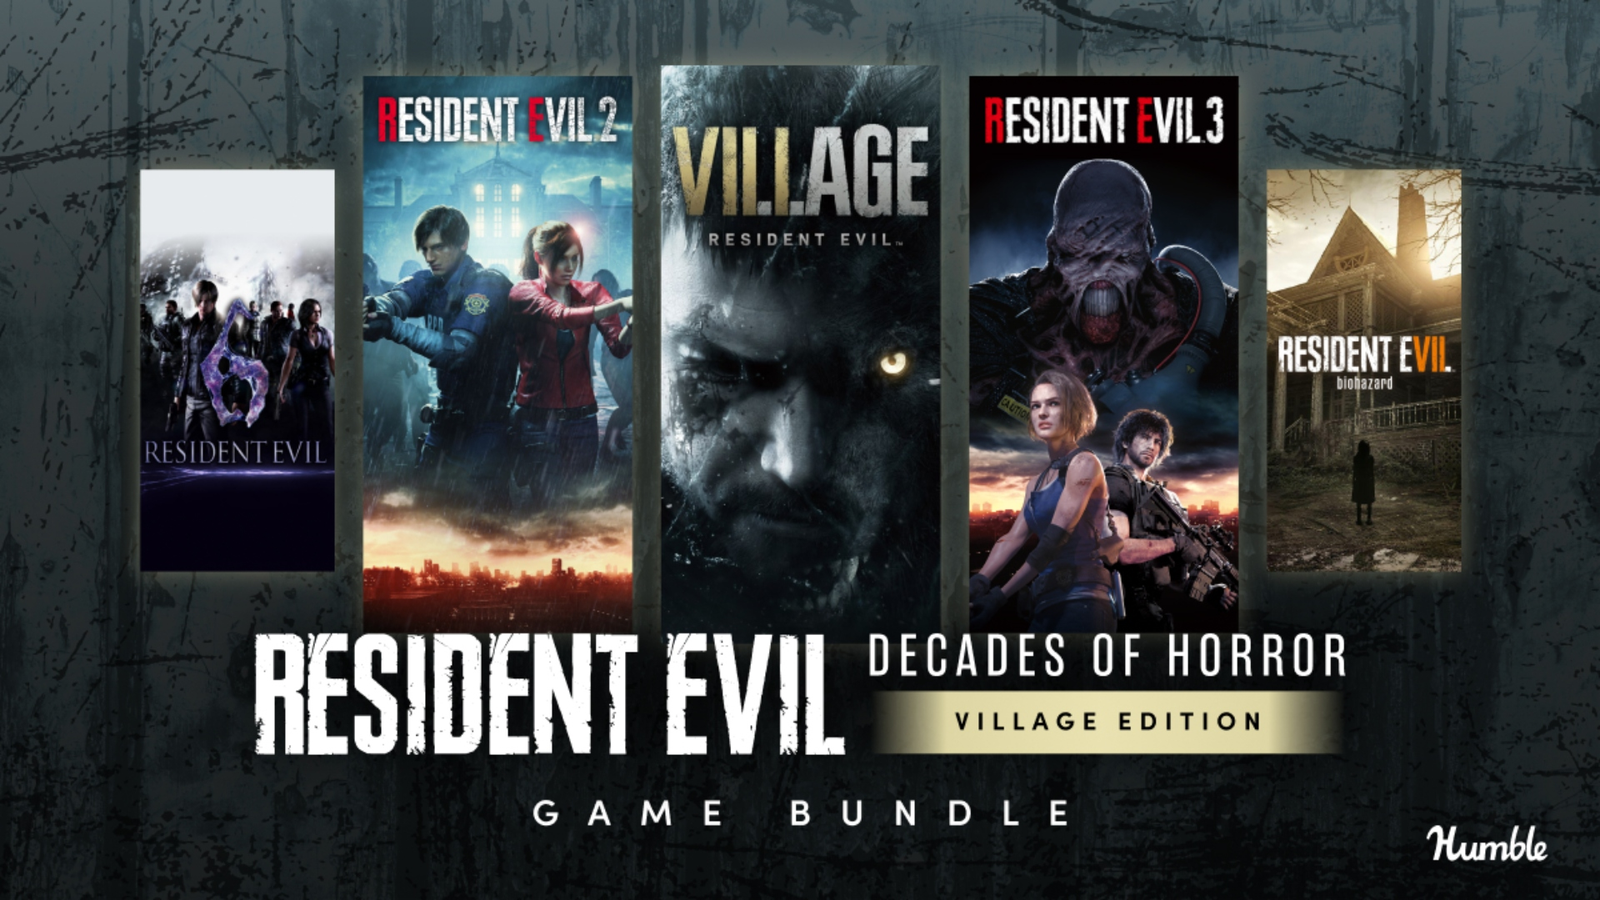 Buy Resident Evil Village from the Humble Store and save 50%